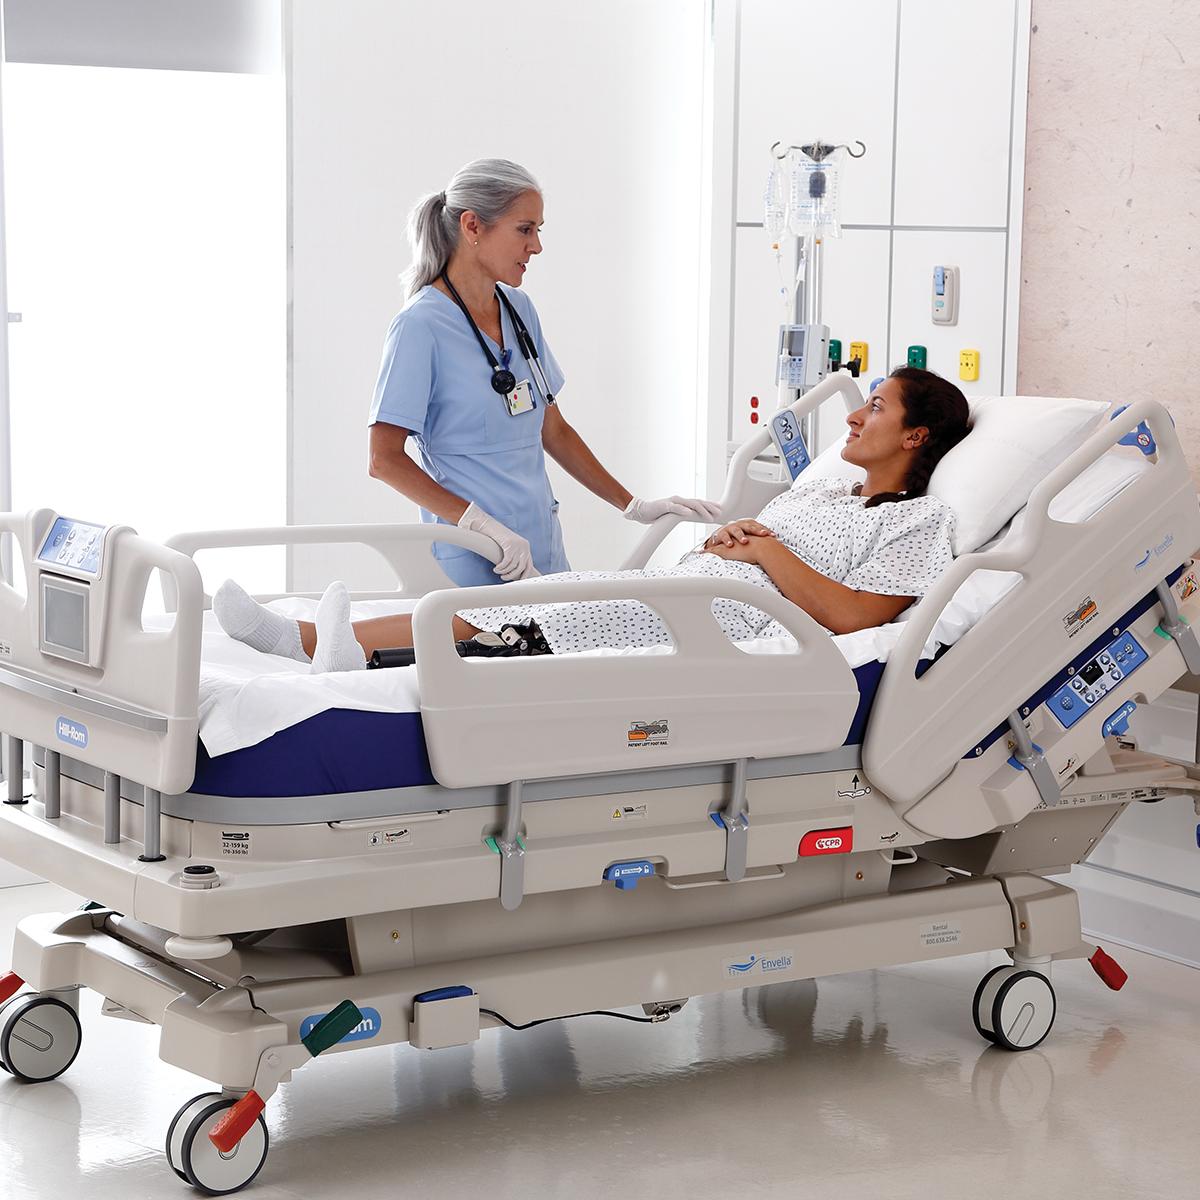 A clinician checks on her patient, who is recovering in an Envella therapy bed in a clean hospital room.